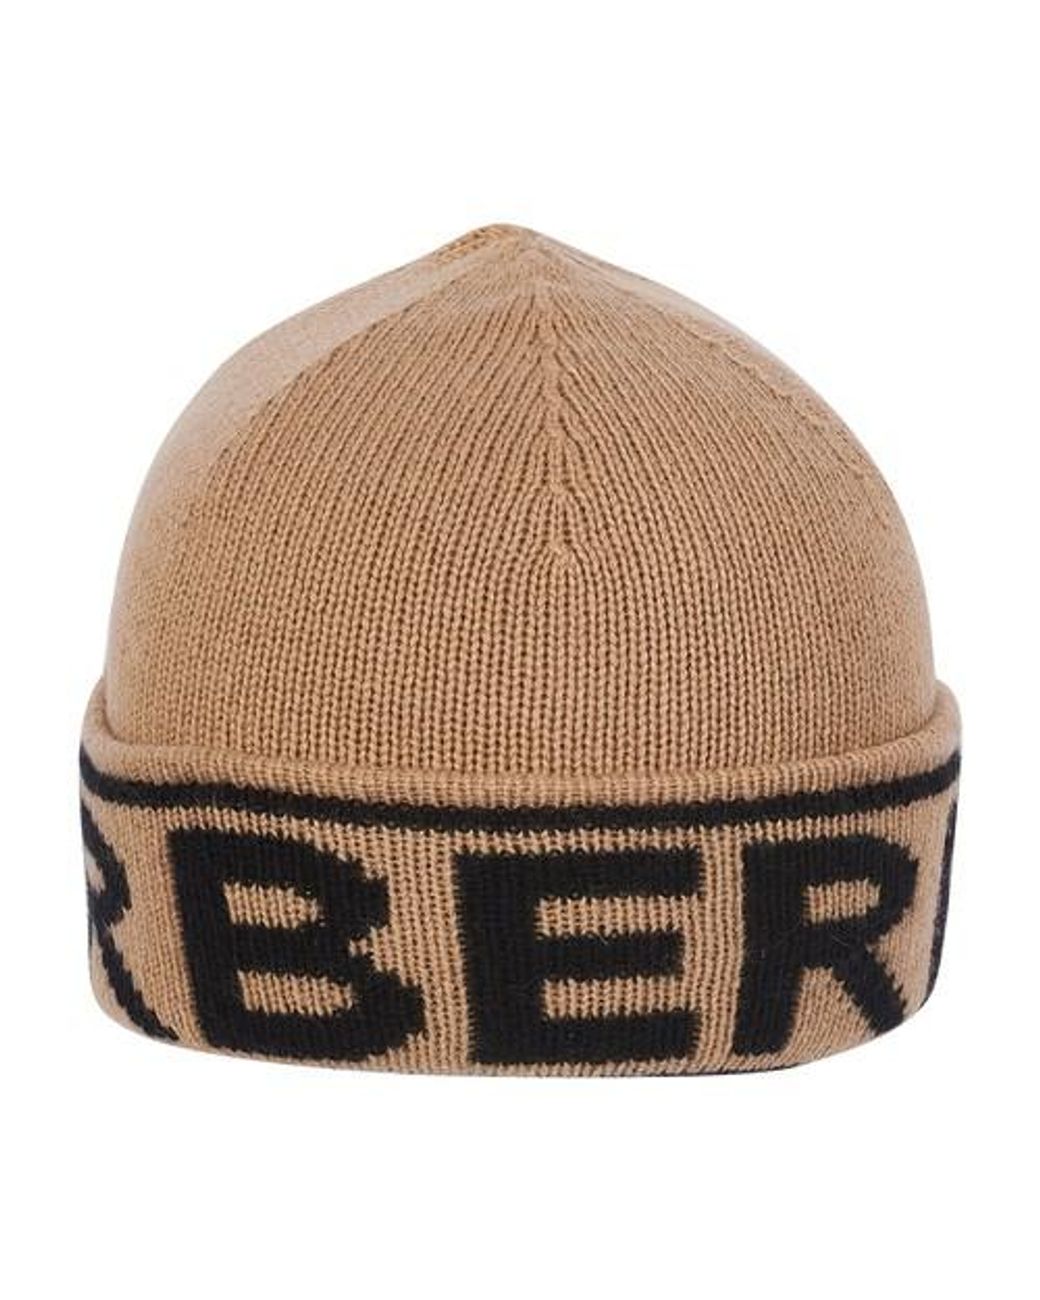 Burberry Logo Cashmere Beanie in Beige (Natural) for Men - Save 14% - Lyst